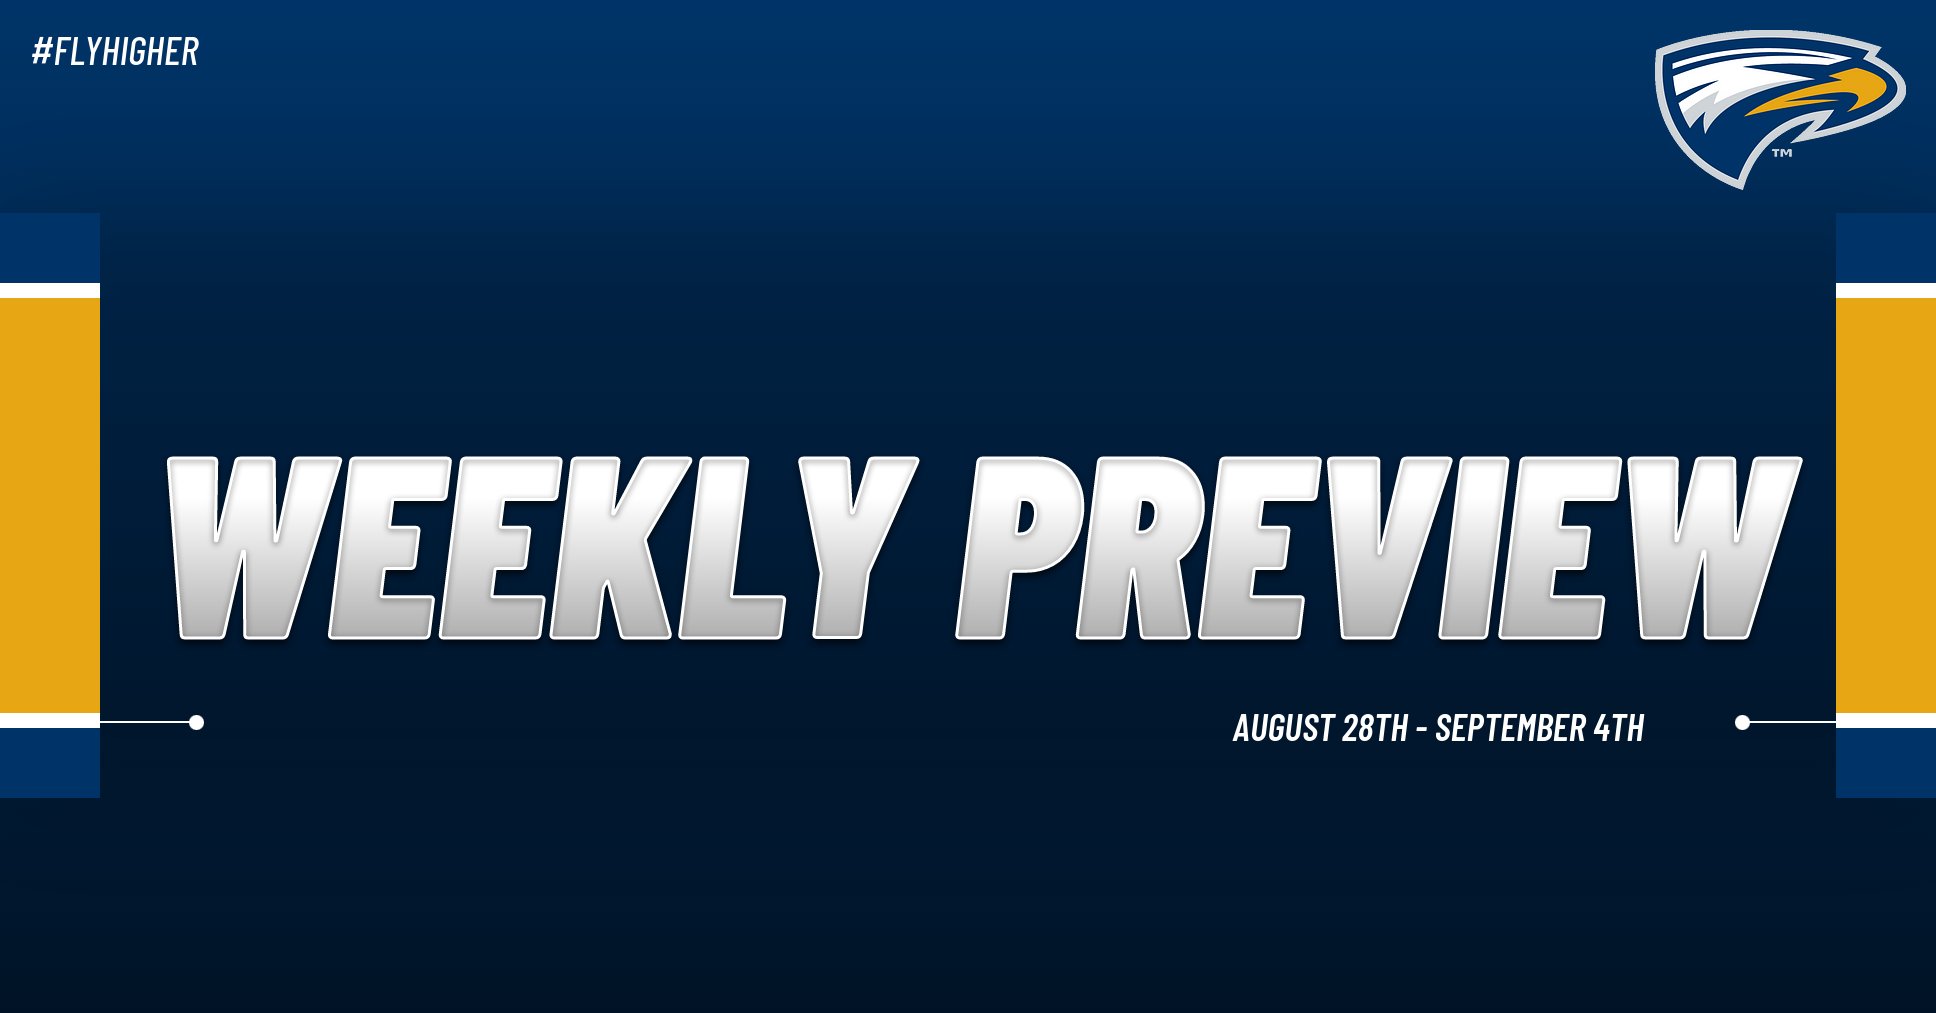 Emory Athletics Weekly Preview: August 28th - September 4th